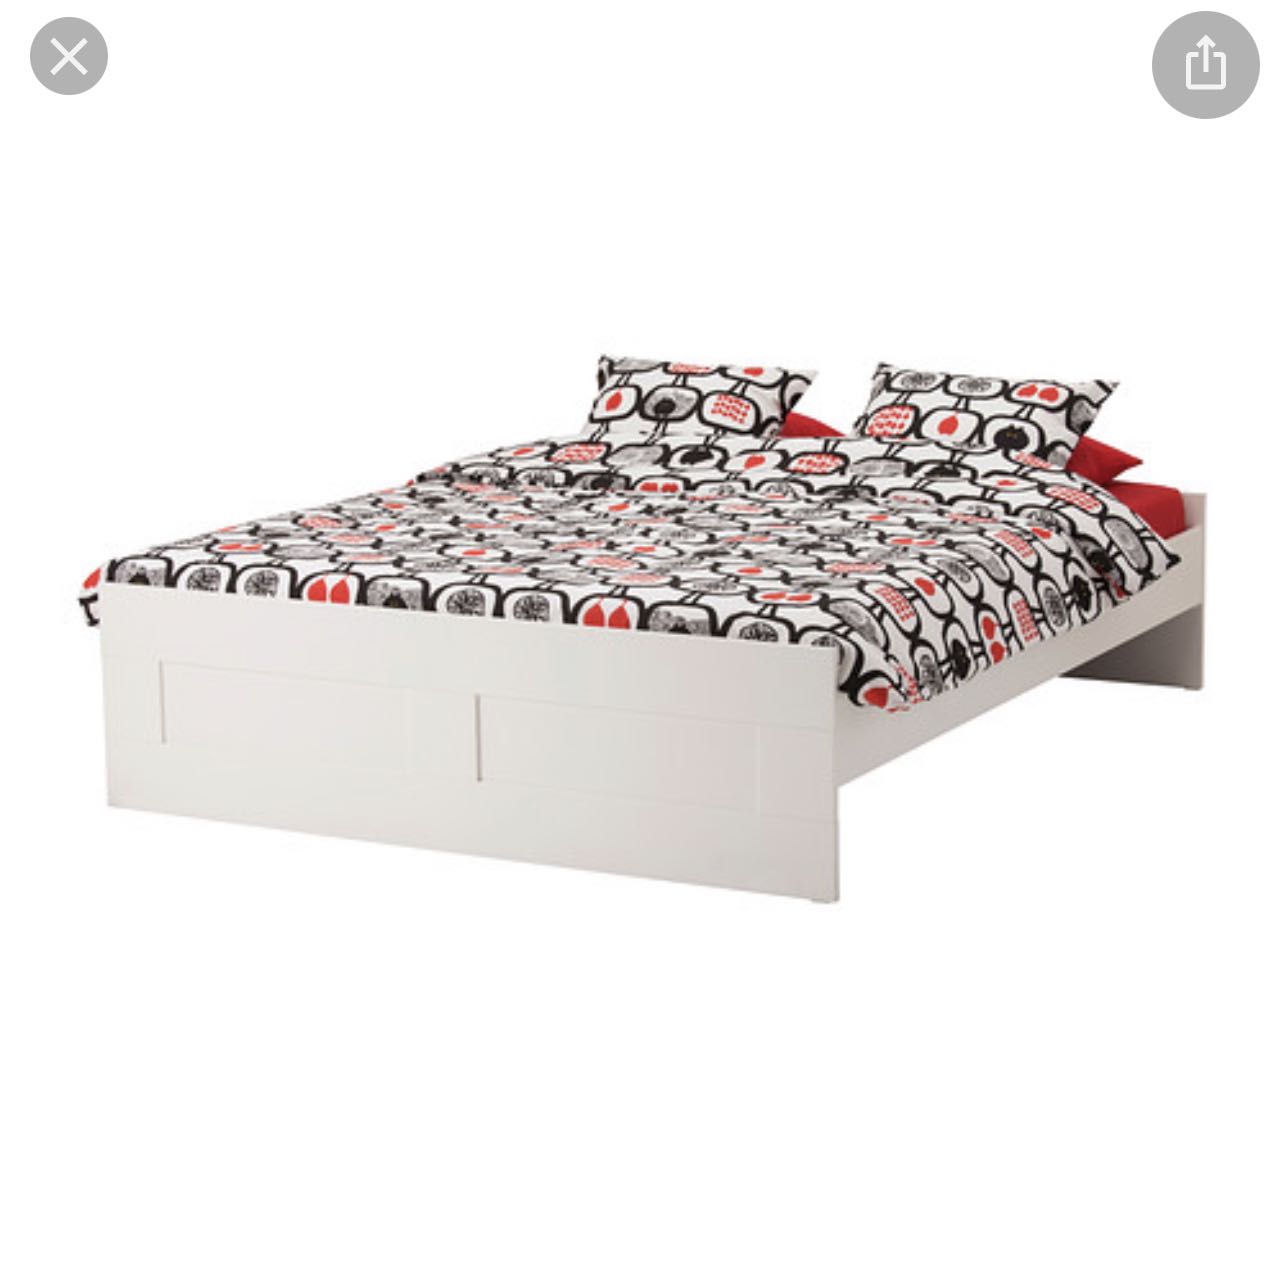 Ikea Brimnes Bed Frame Without Storage, Ikea Brimnes King Bed Frame With Storage